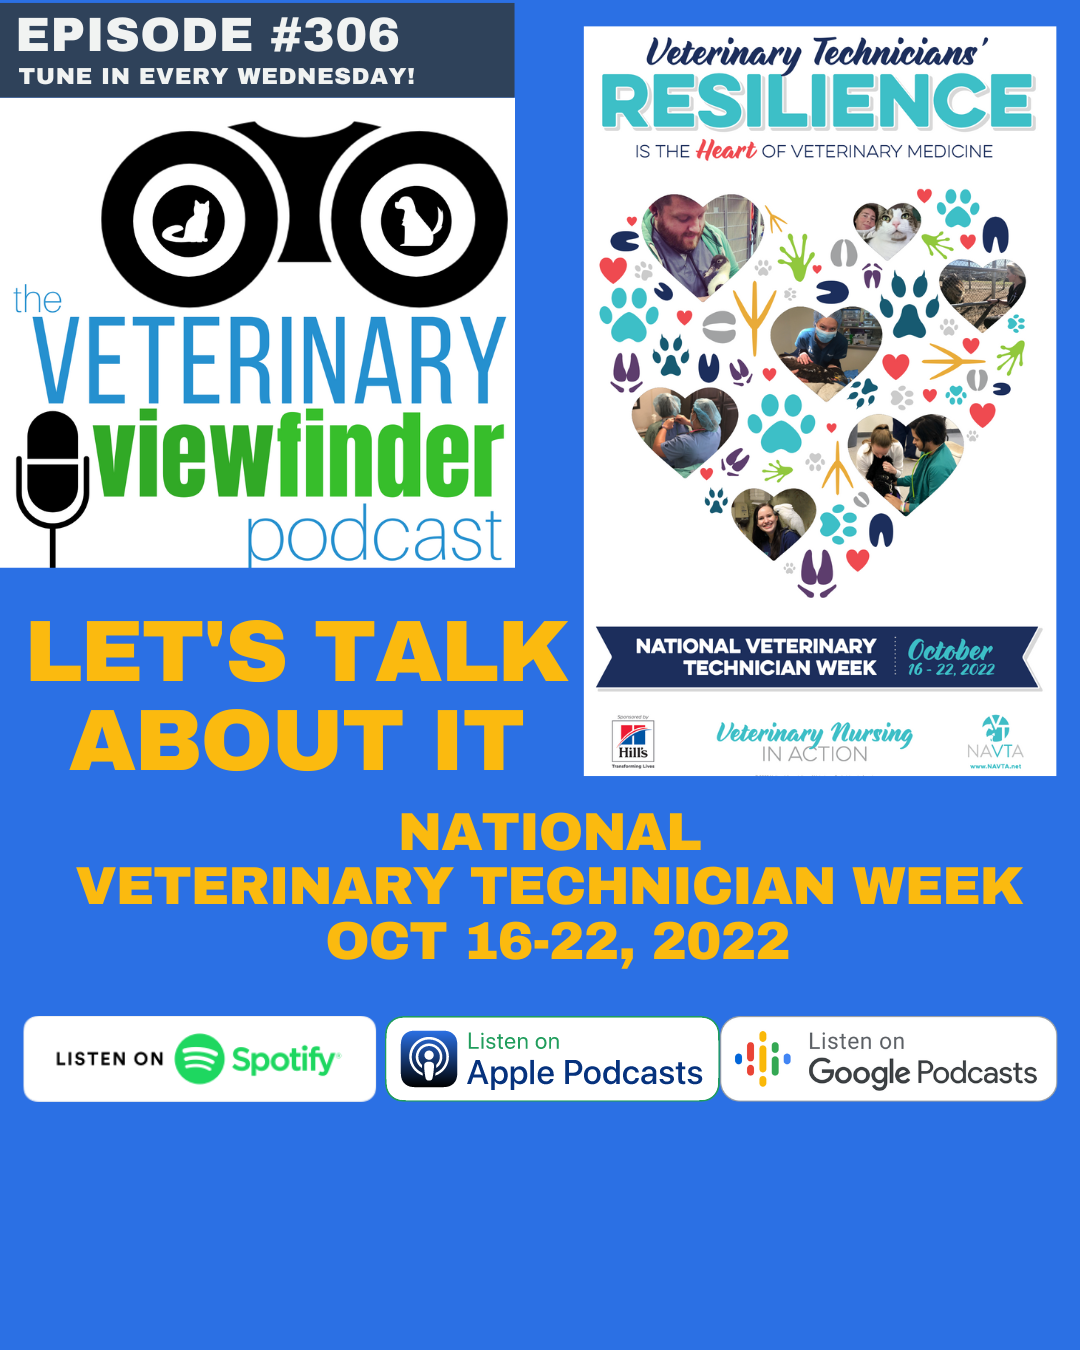 Let's Talk about National Veterinary Technician Week Oct 1622, 2022